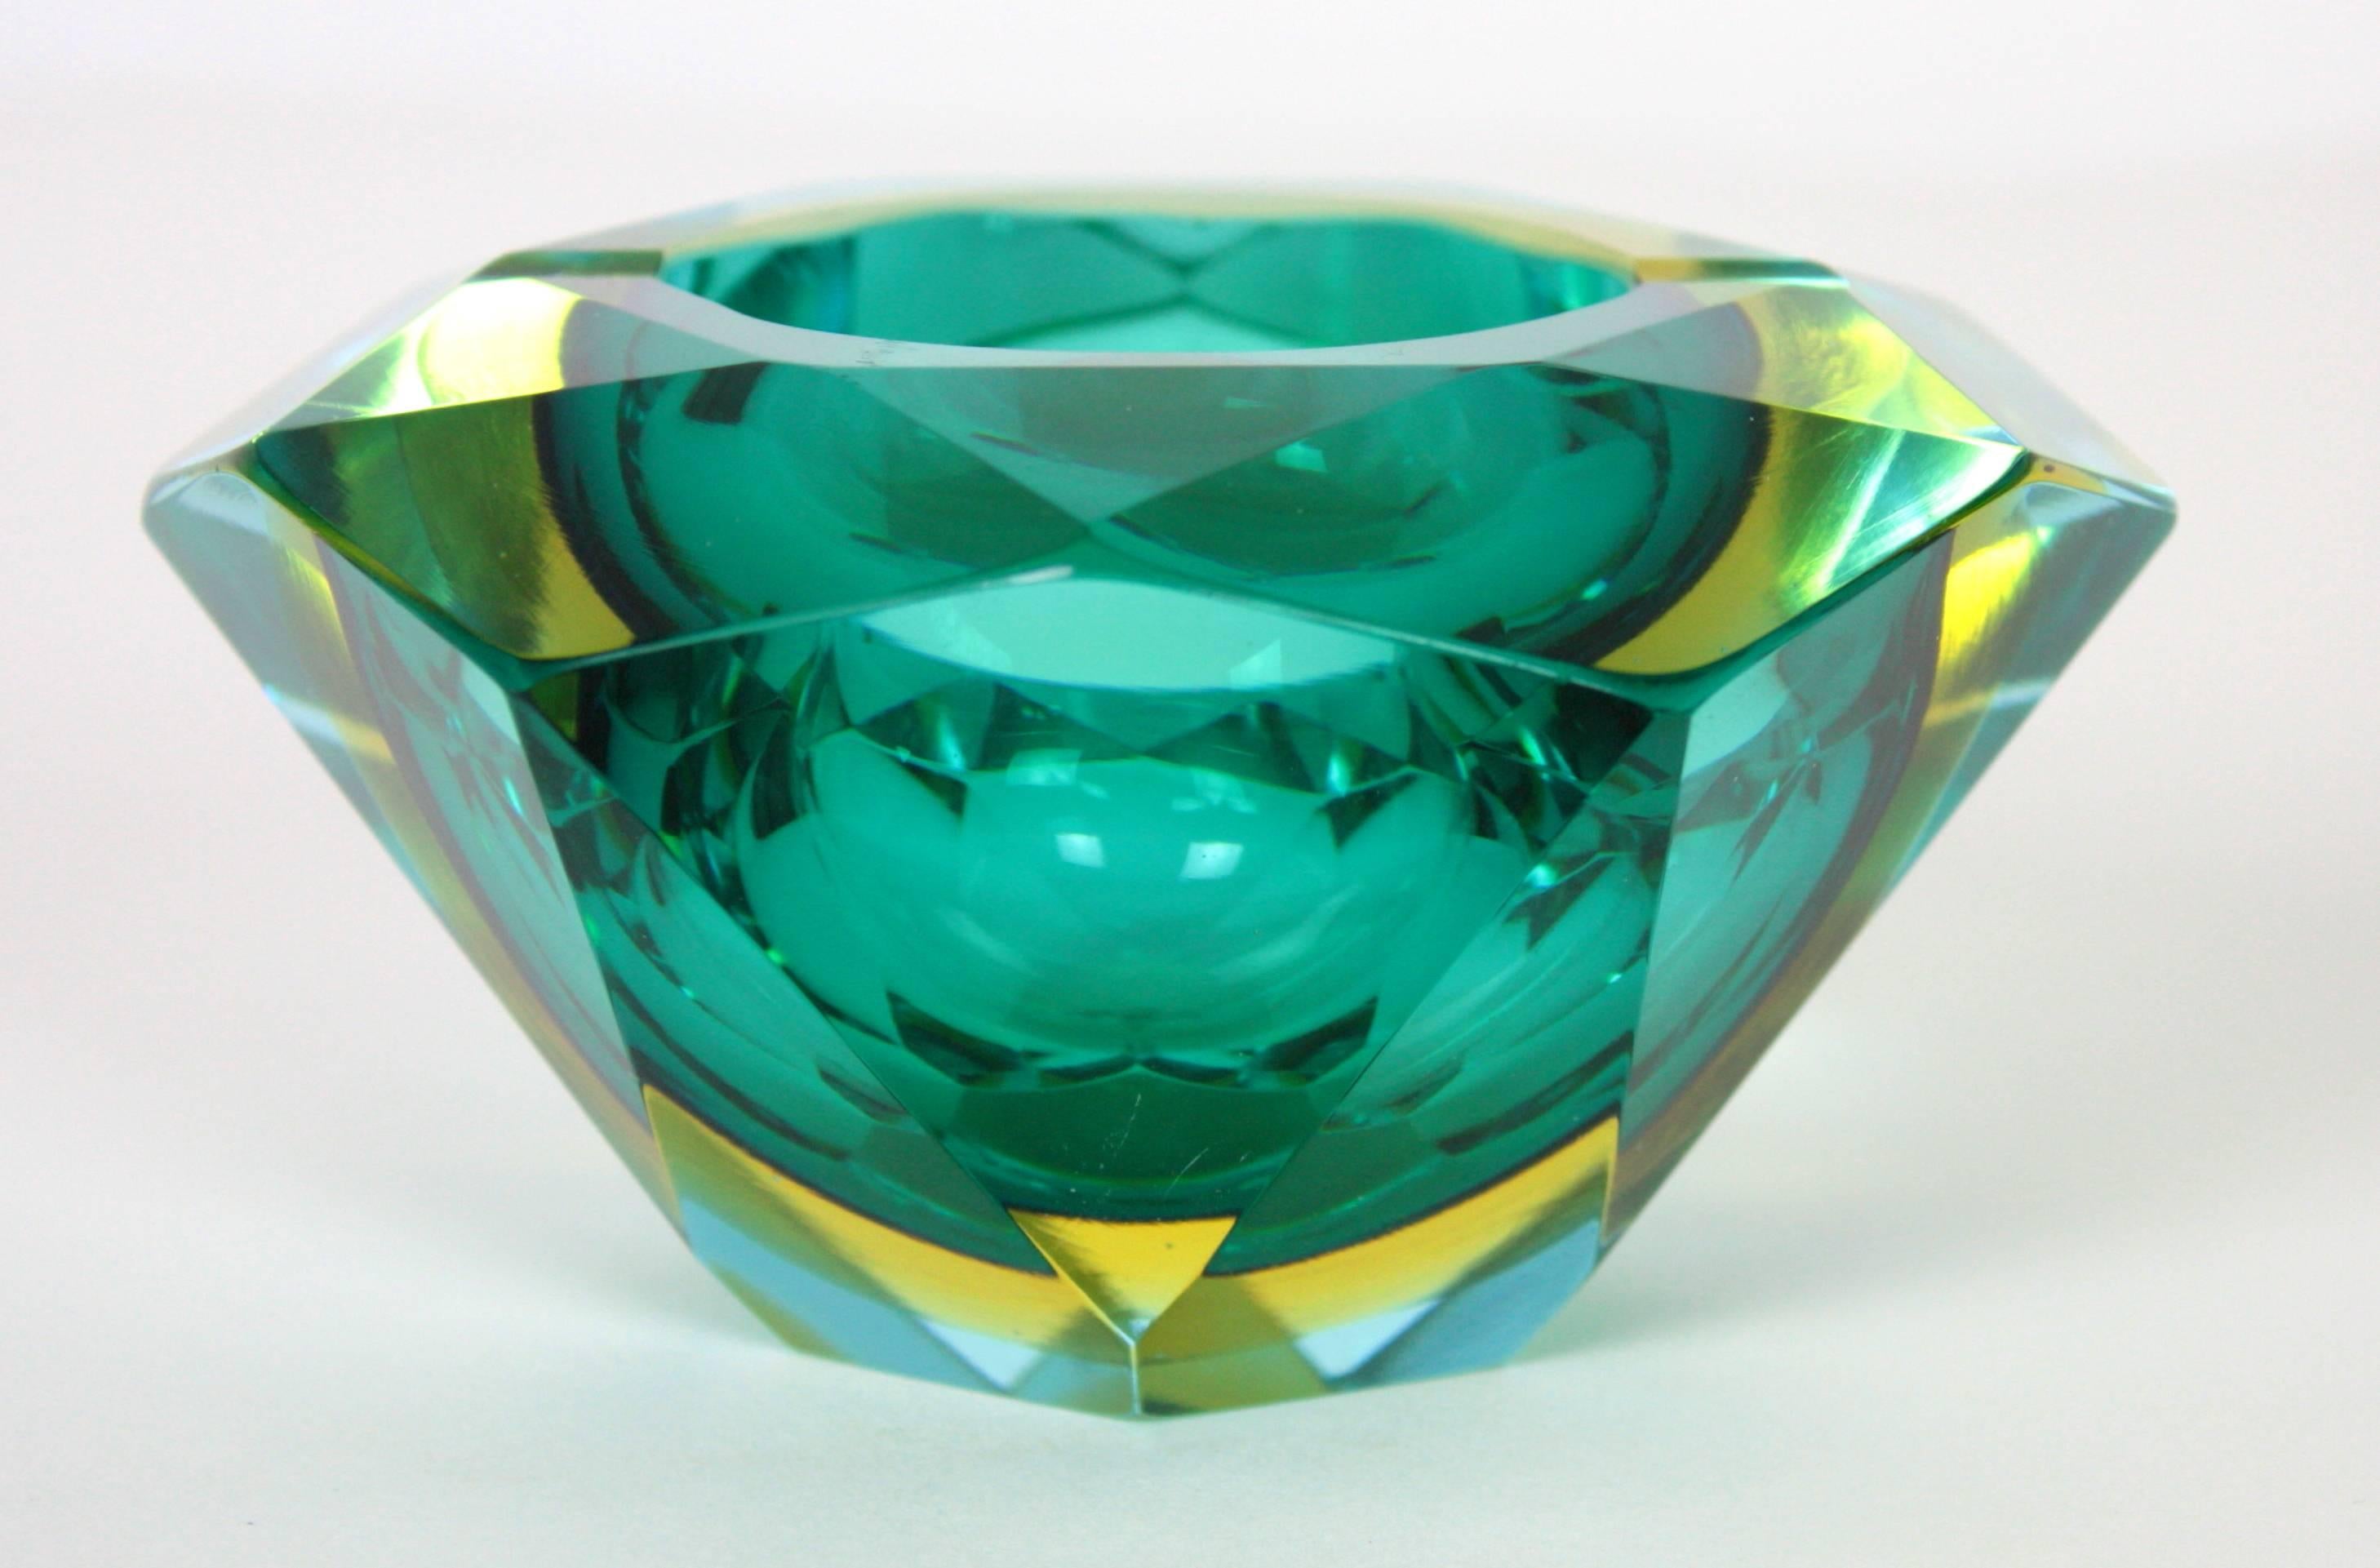 Flavio Poli Sommerso faceted diamond shaped Murano glass ashtray in aqua green/blue and amber. Italy, 1950s.

The piece is in excellent condition.